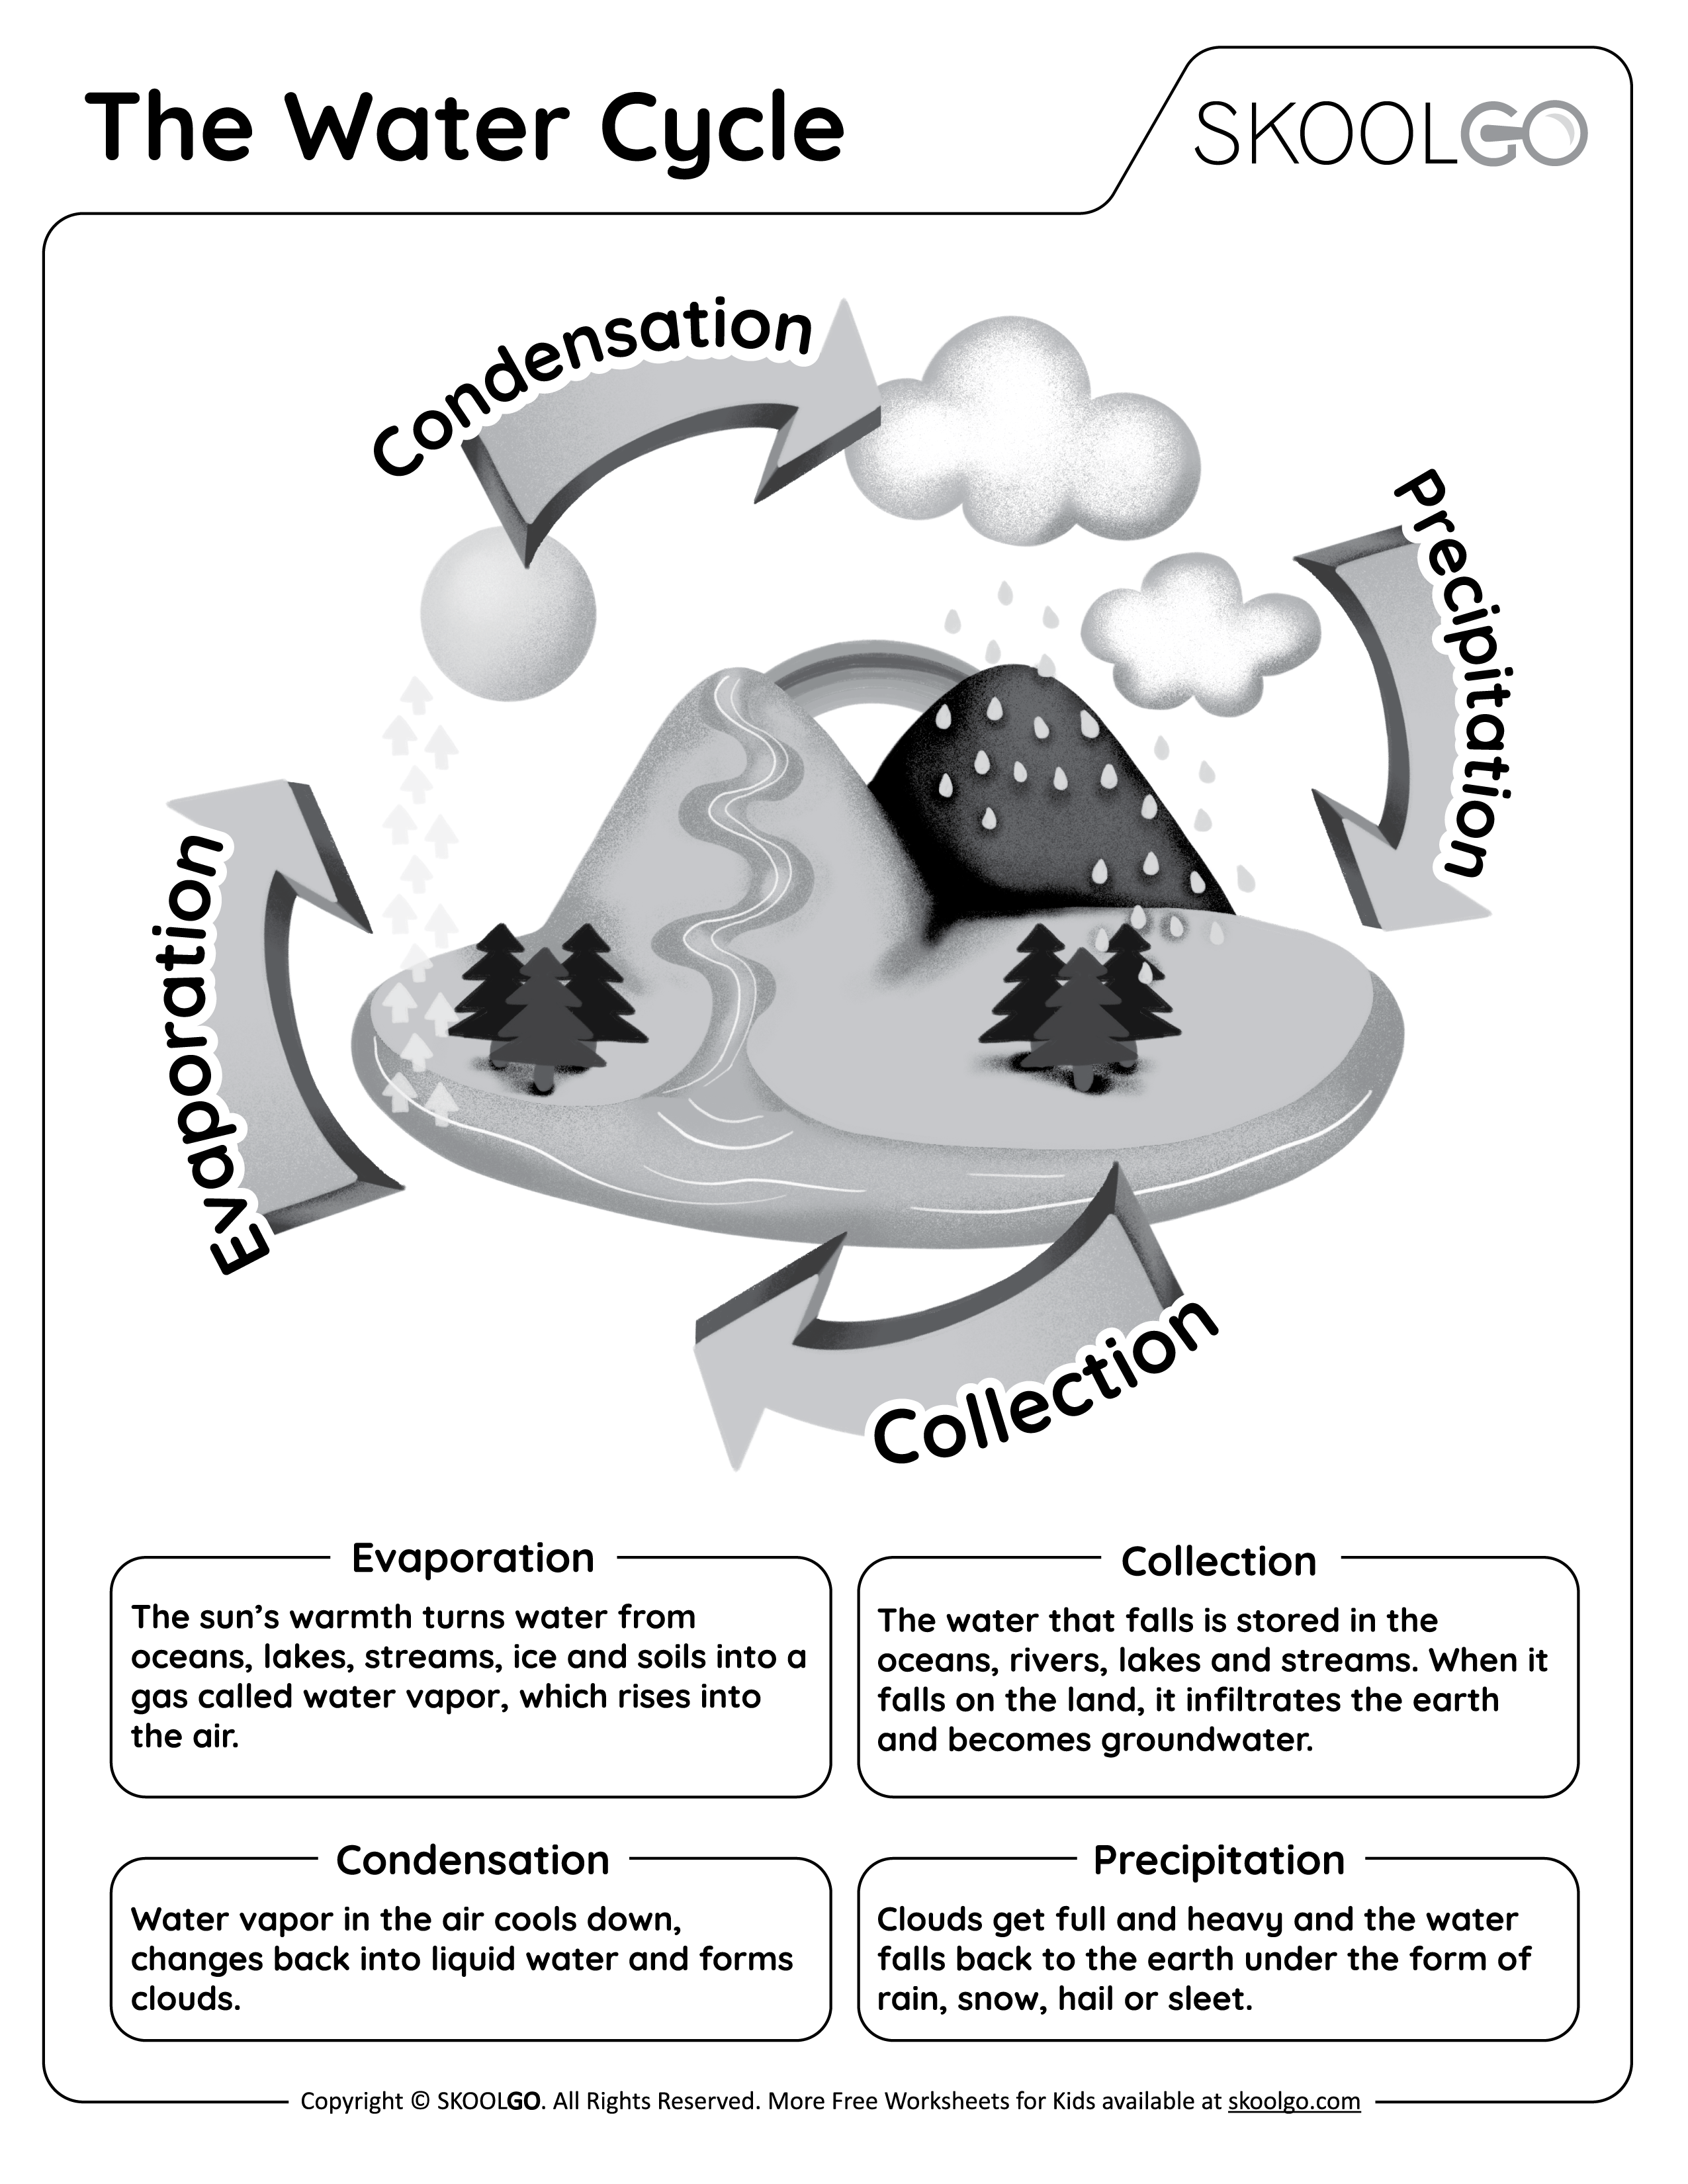 The Water Cycle - Free Worksheet for Kids - Black and White